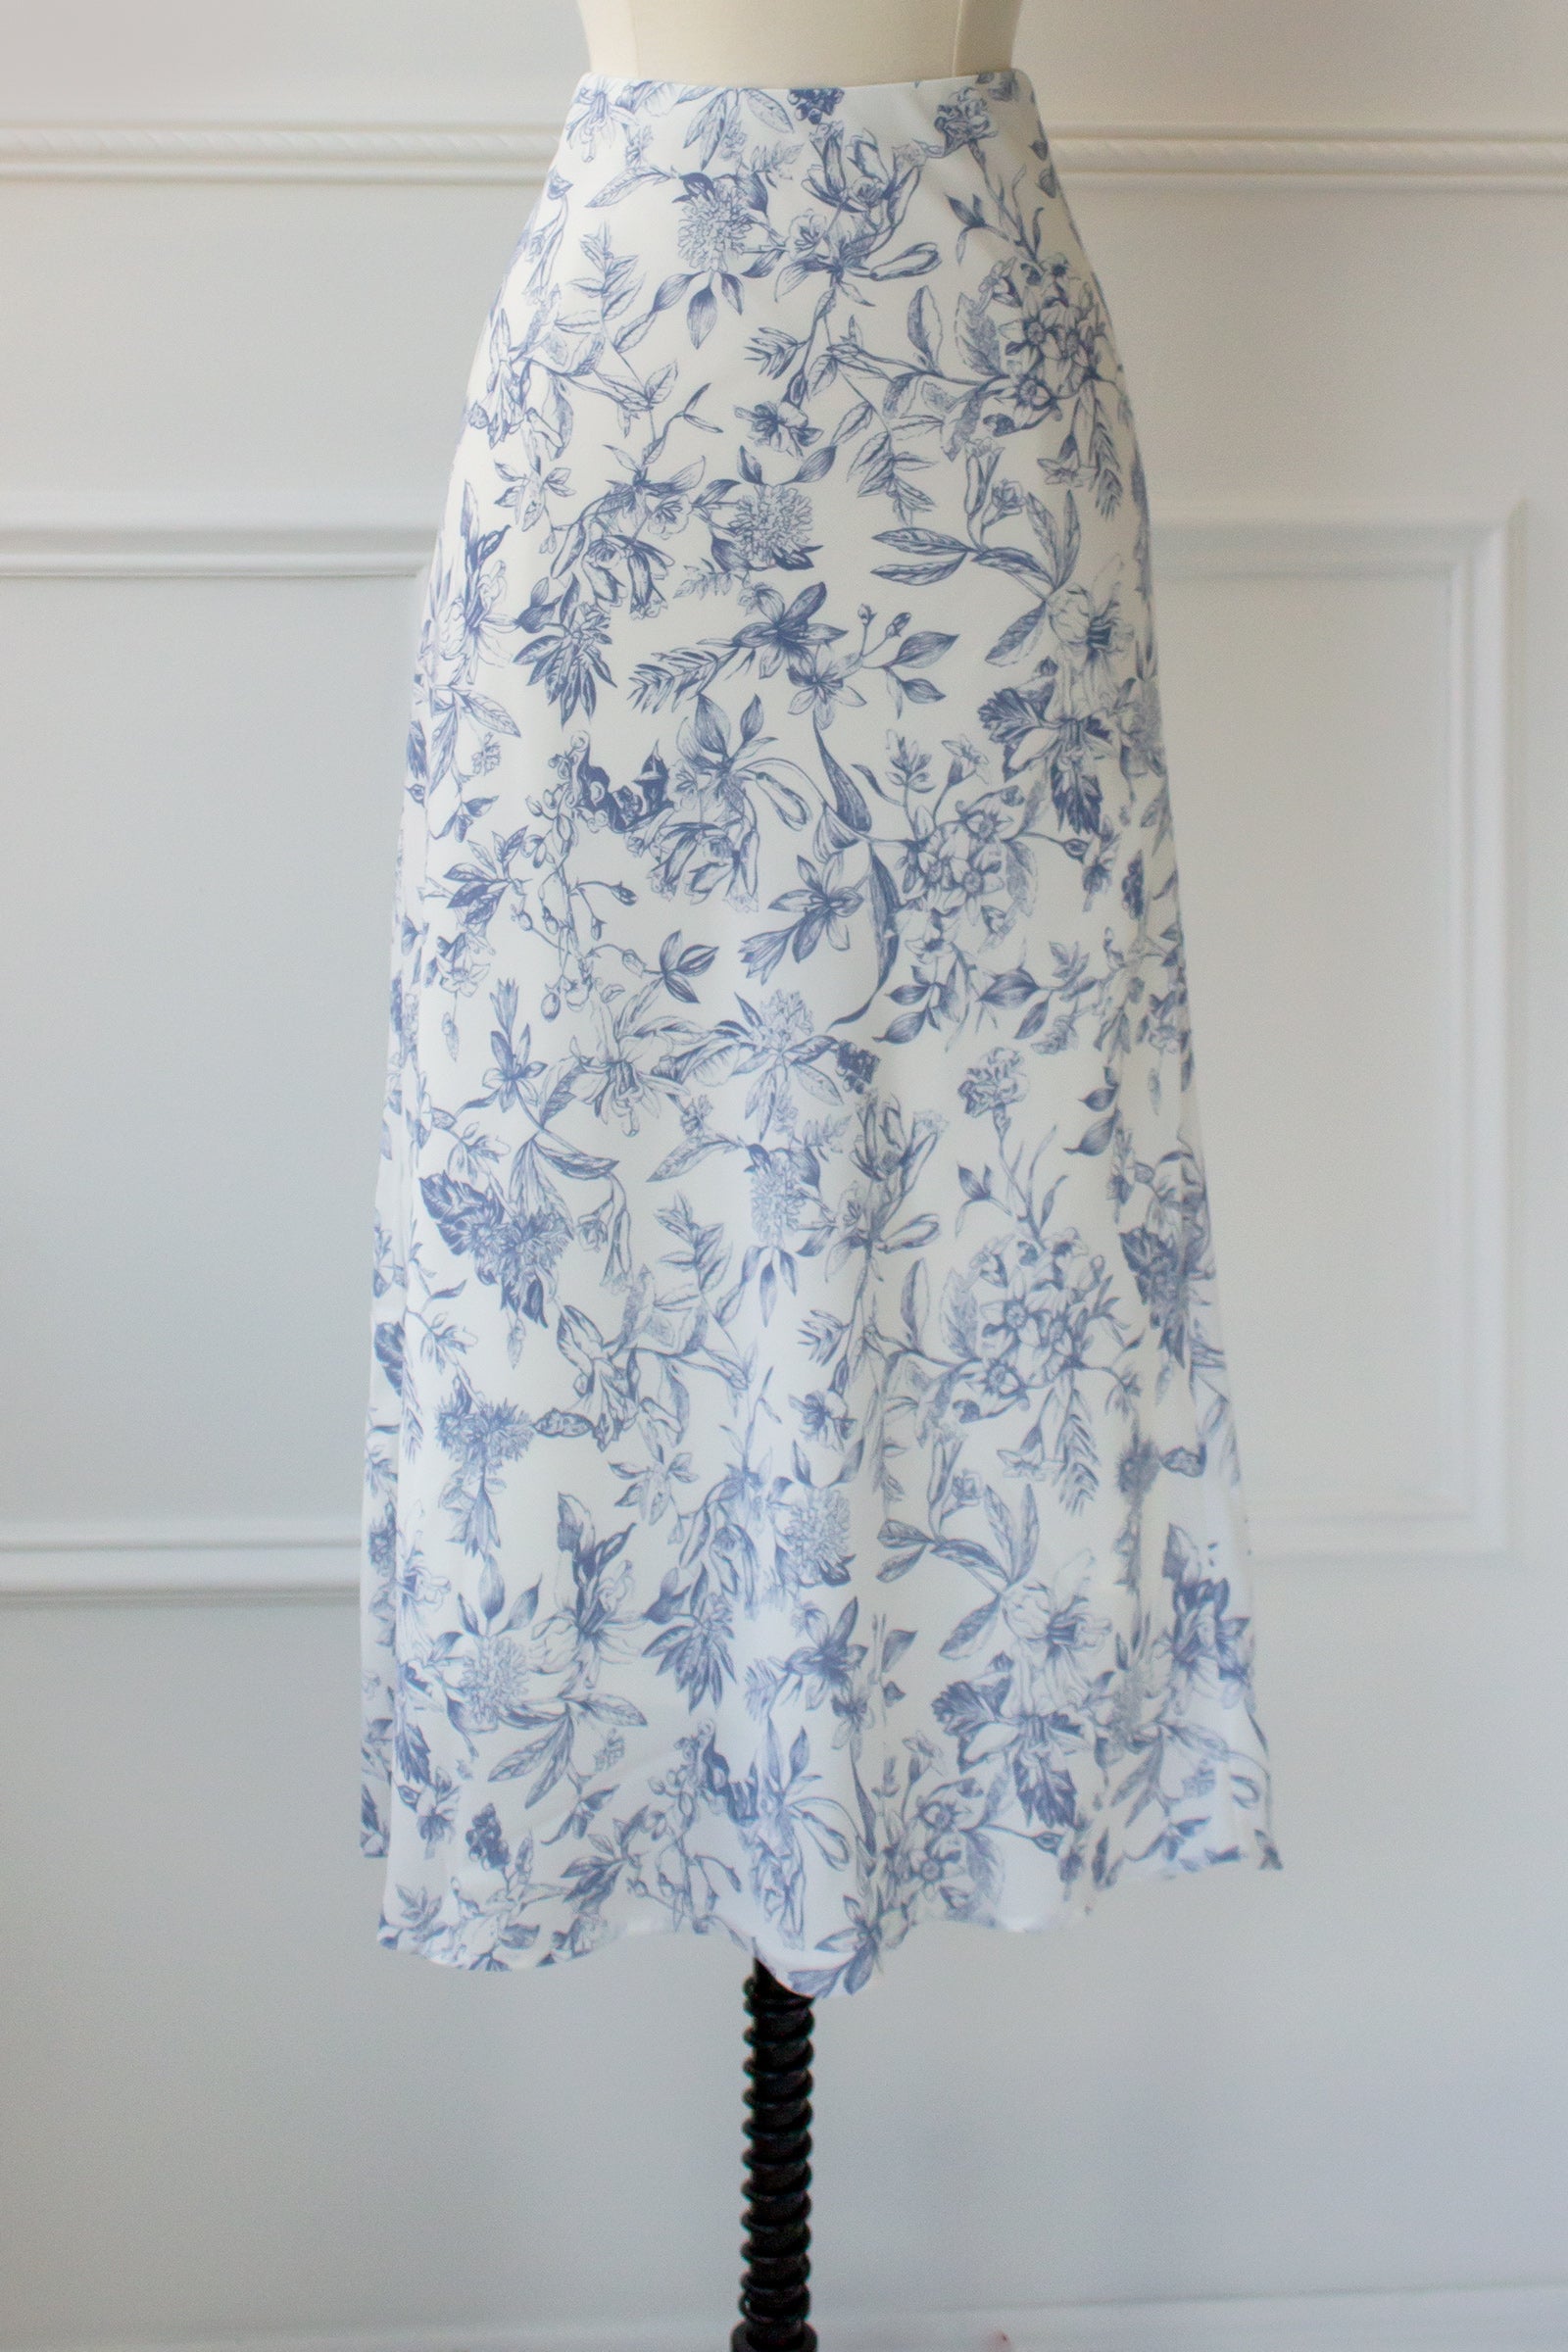 Printed Floral Midi Skirt in a Blue and White Toile